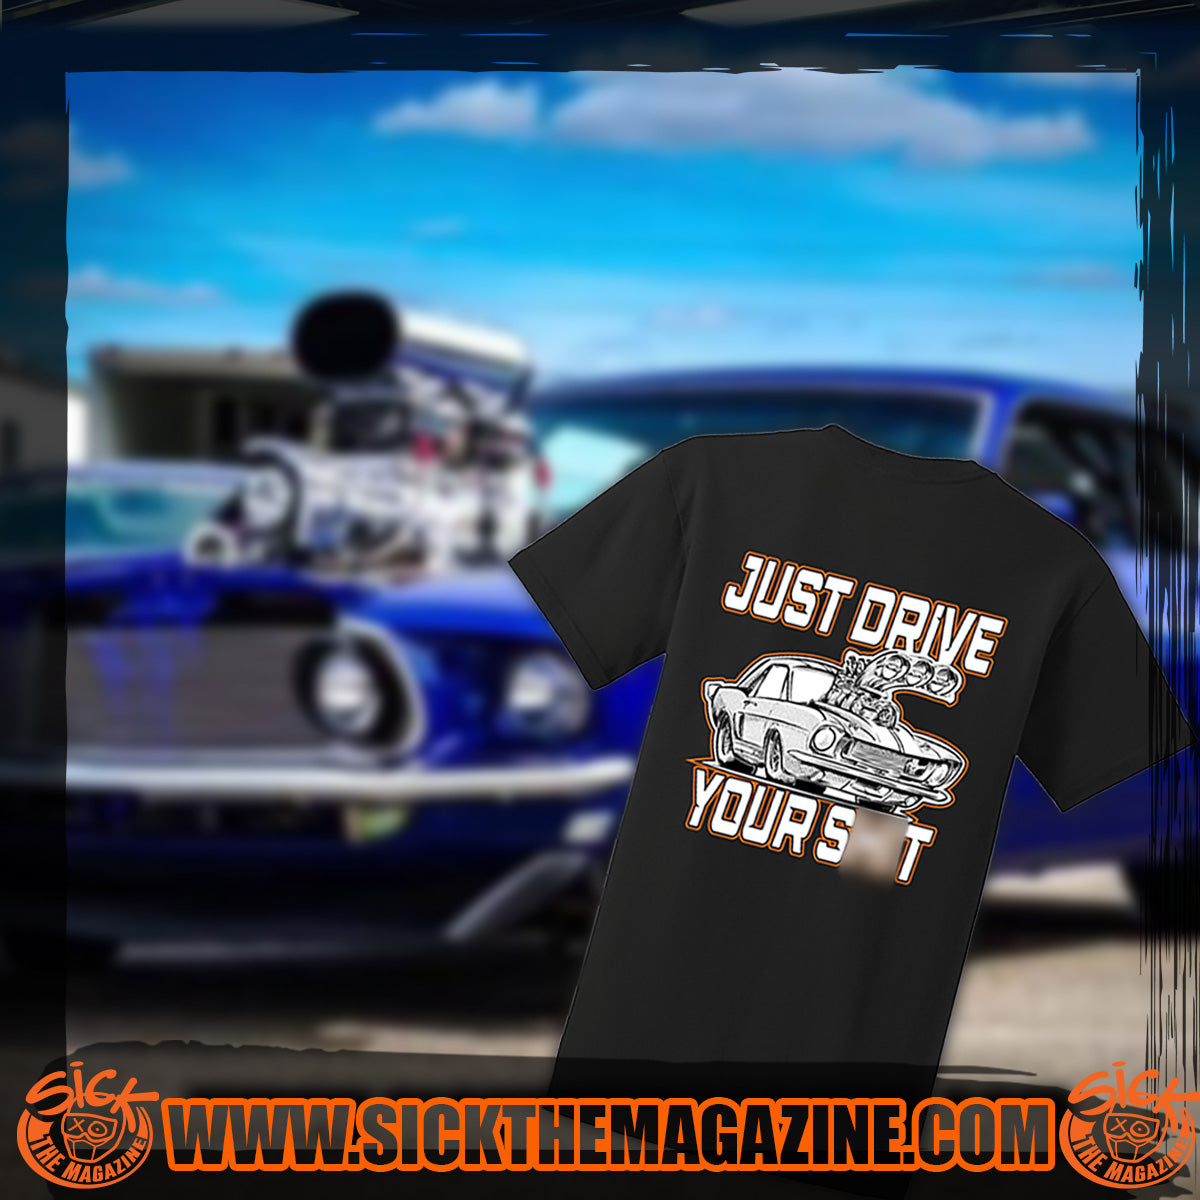 Just Drive Your S*it T-Shirt Ford